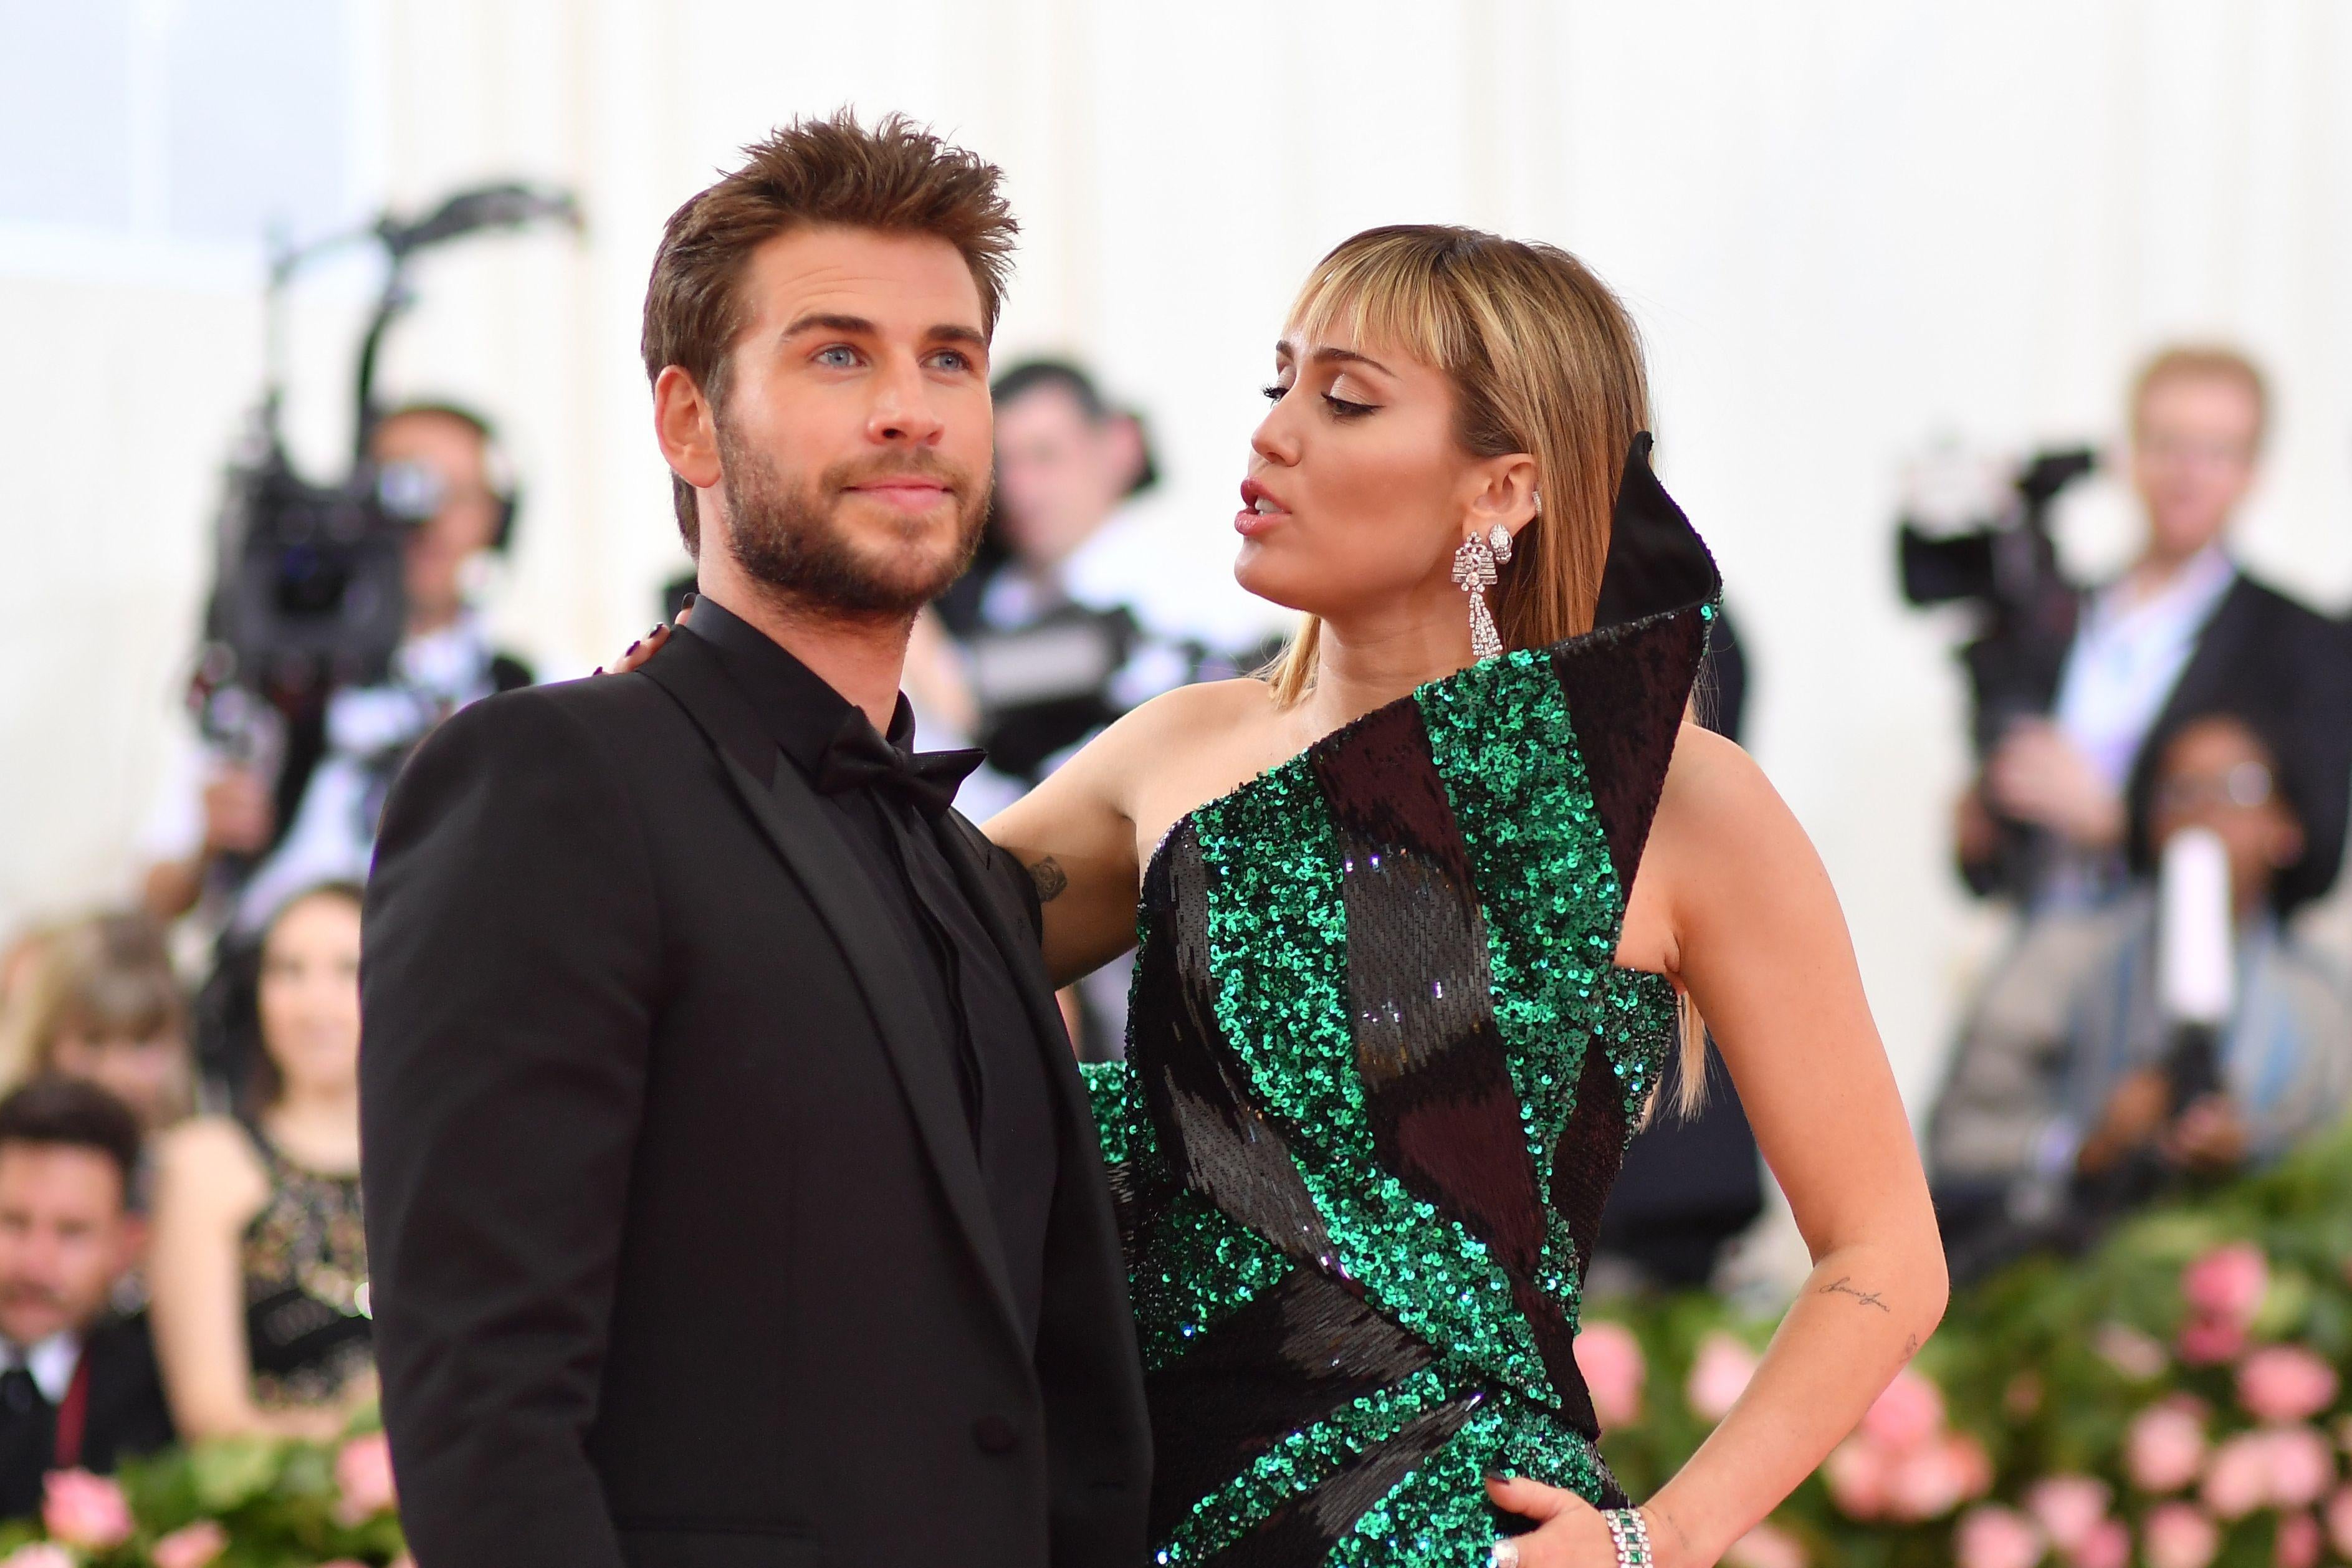 Miley Cyrus (R) and Liam Hemsworth stand on the red carpet at the 2019 Met Gala.